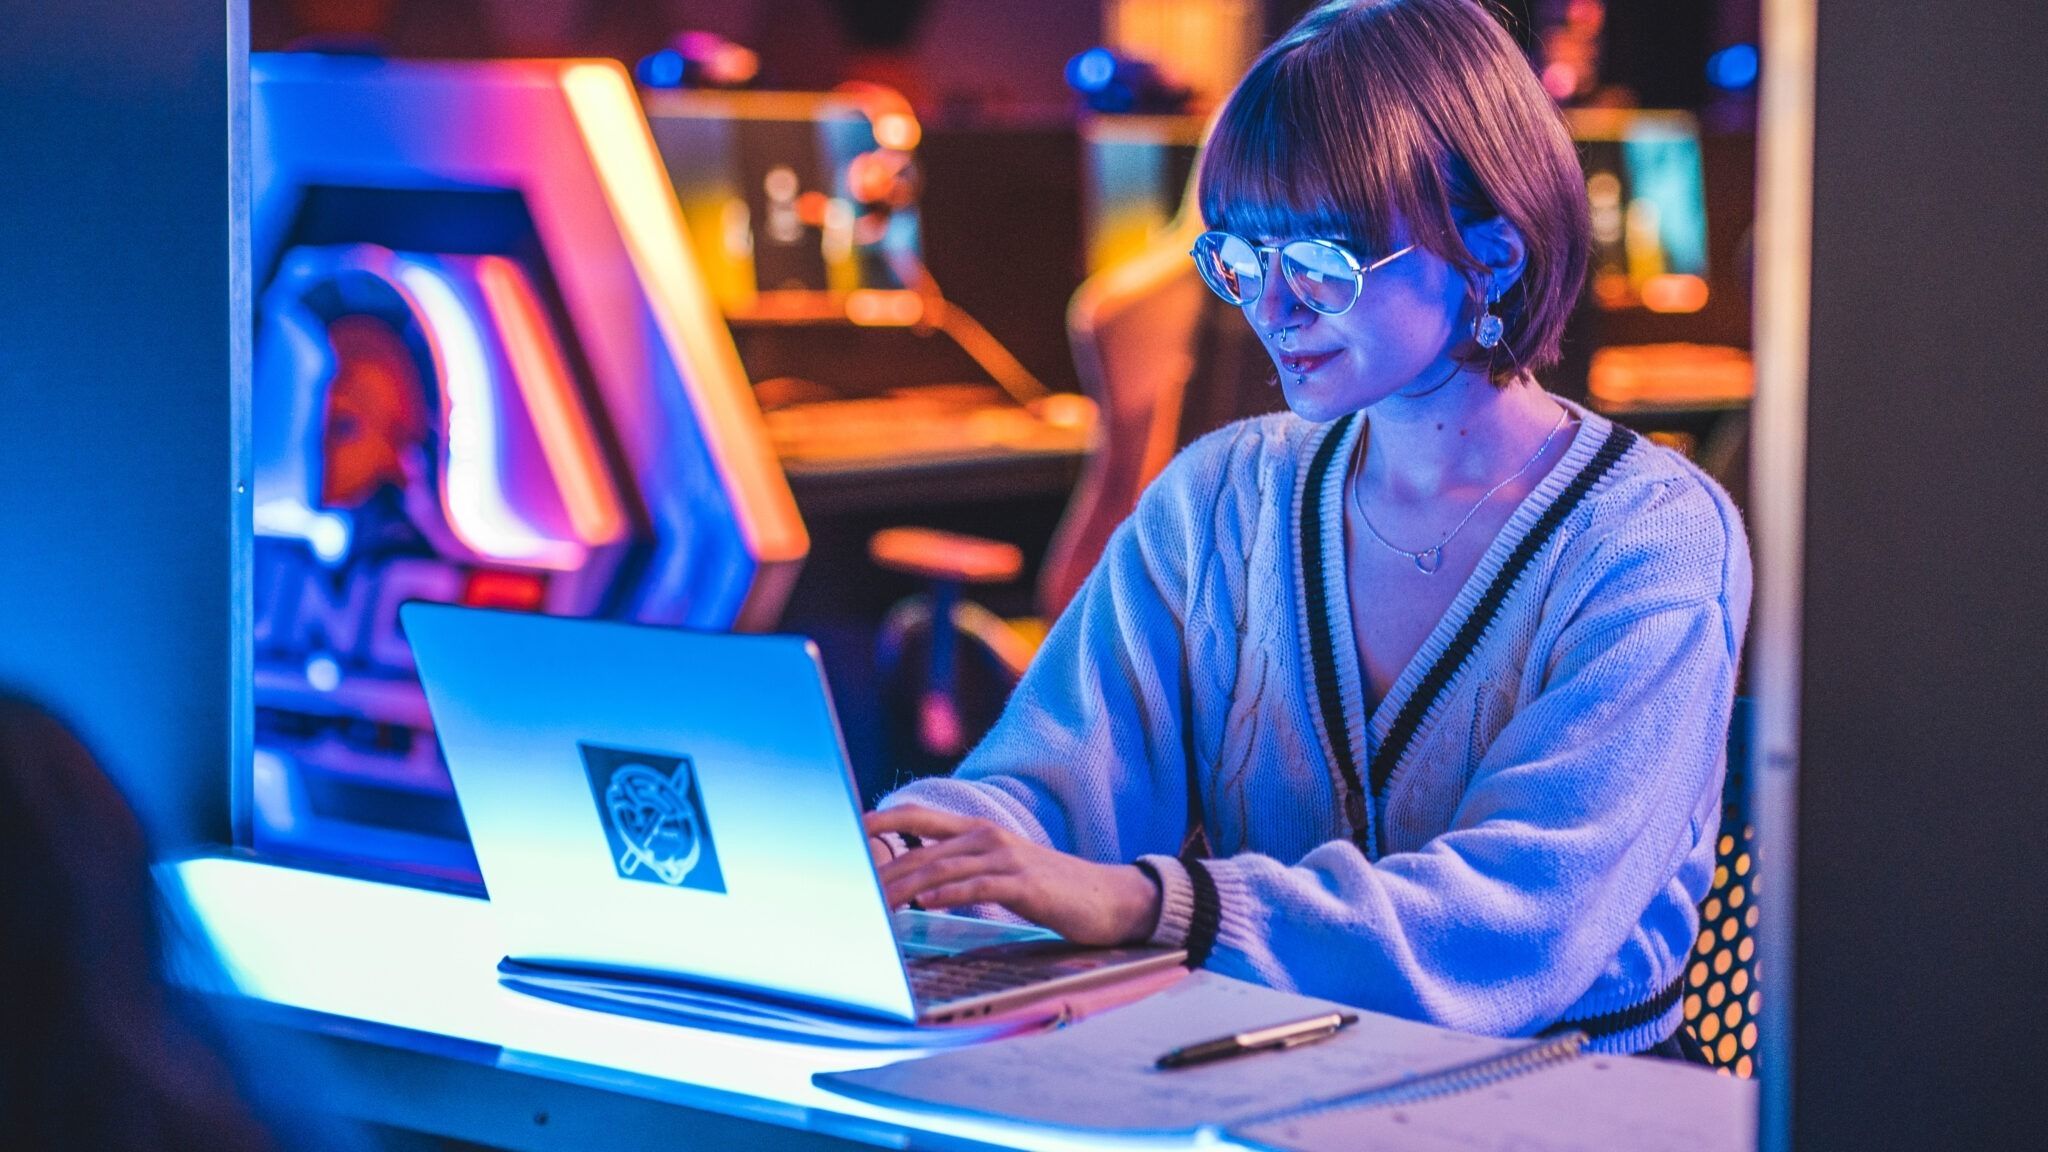 Undergraduate student Sophia Rosenberg sits in UNCG's E-Sports arena as they work on their laptop